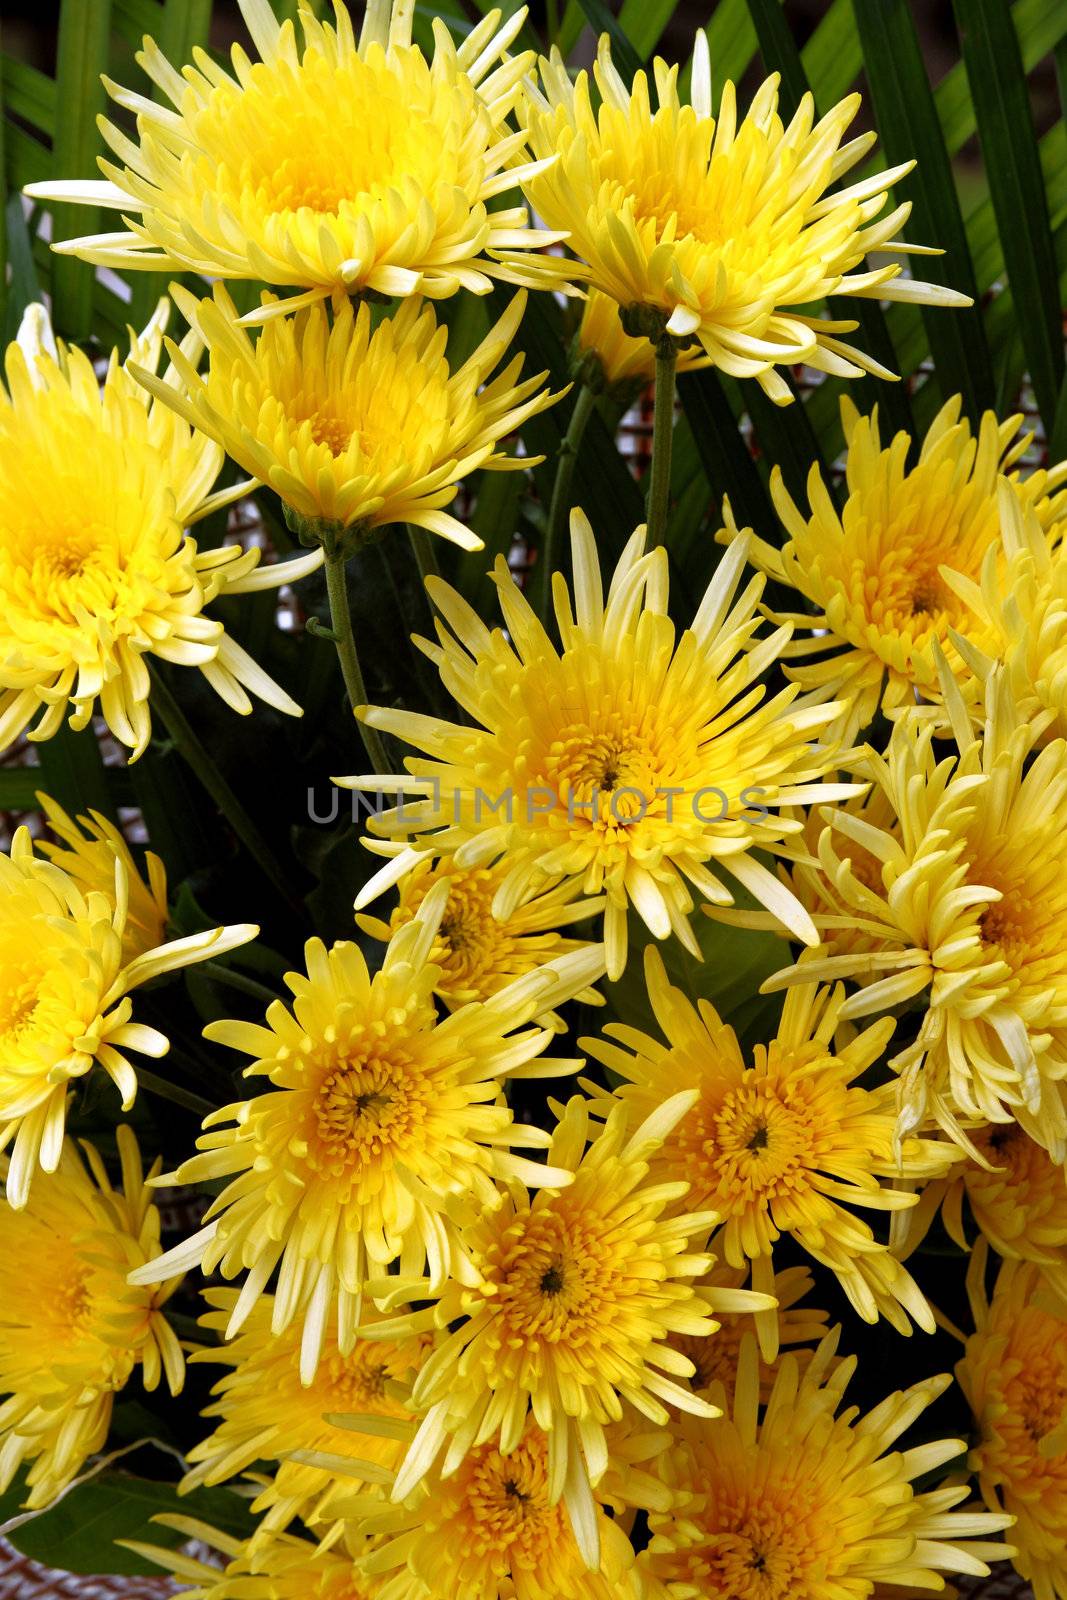 There are beaitful chrysanthemums , colour of yellow